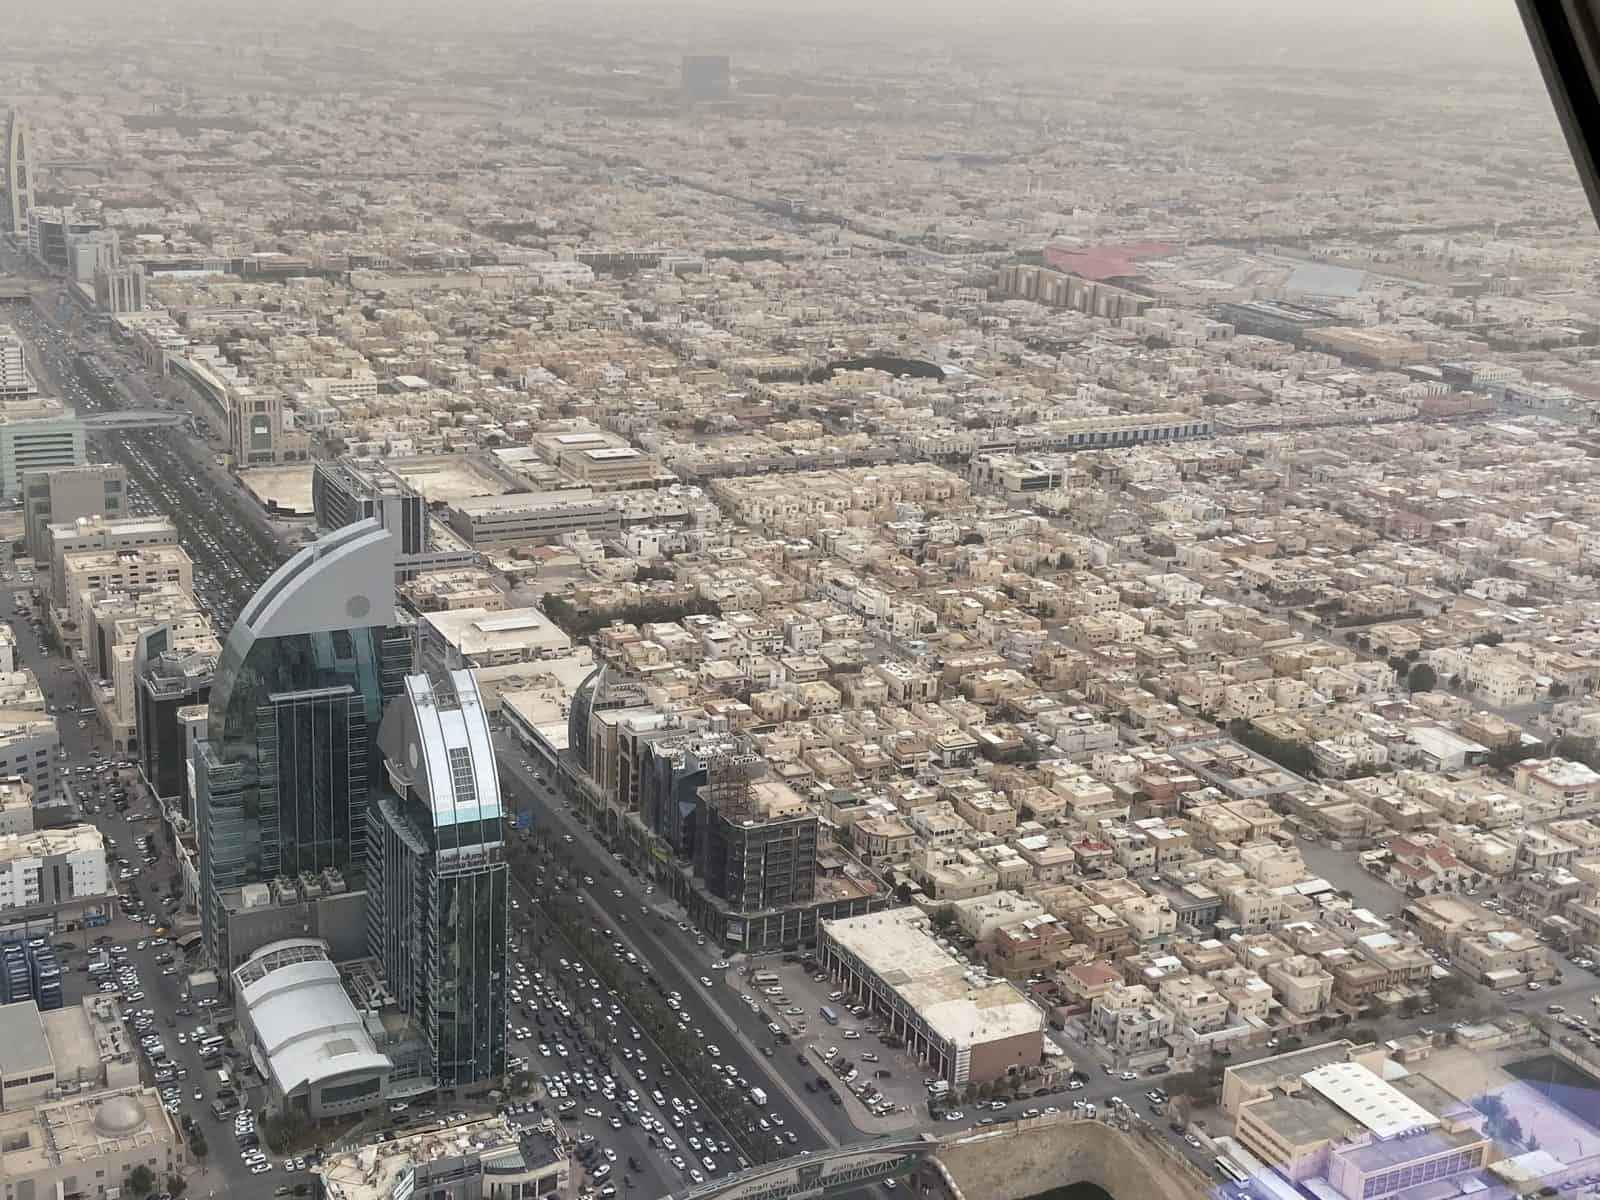 The view of Riyadh from the Kingdom Centre's Sky Bridge.